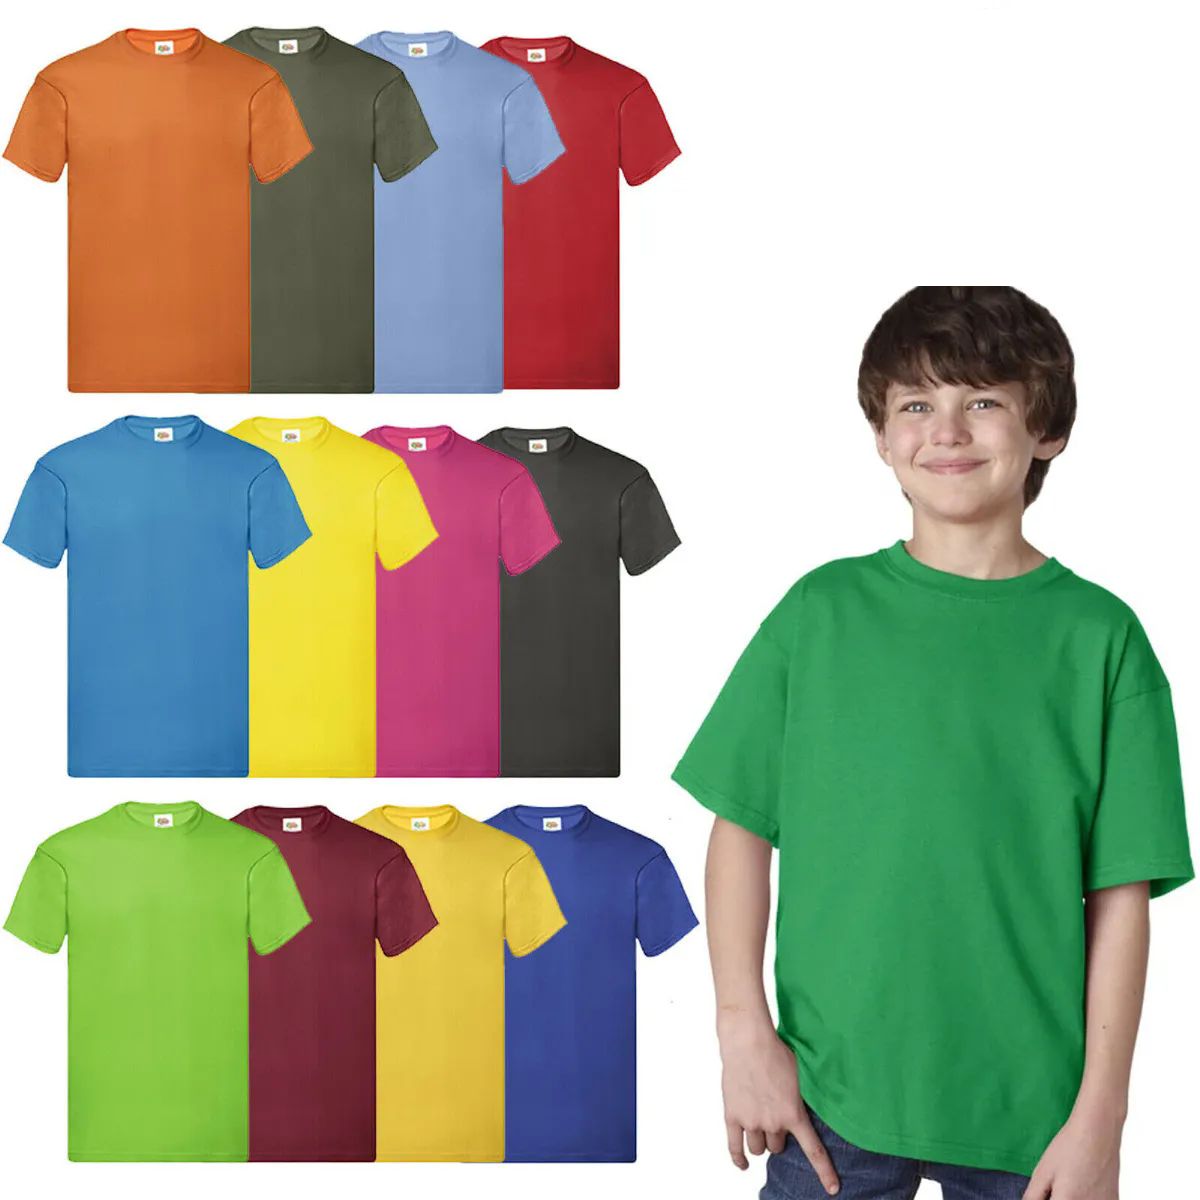 72 Pieces of Billionhats Kids Youth Cotton Assorted Colors T-Shirts Size Large